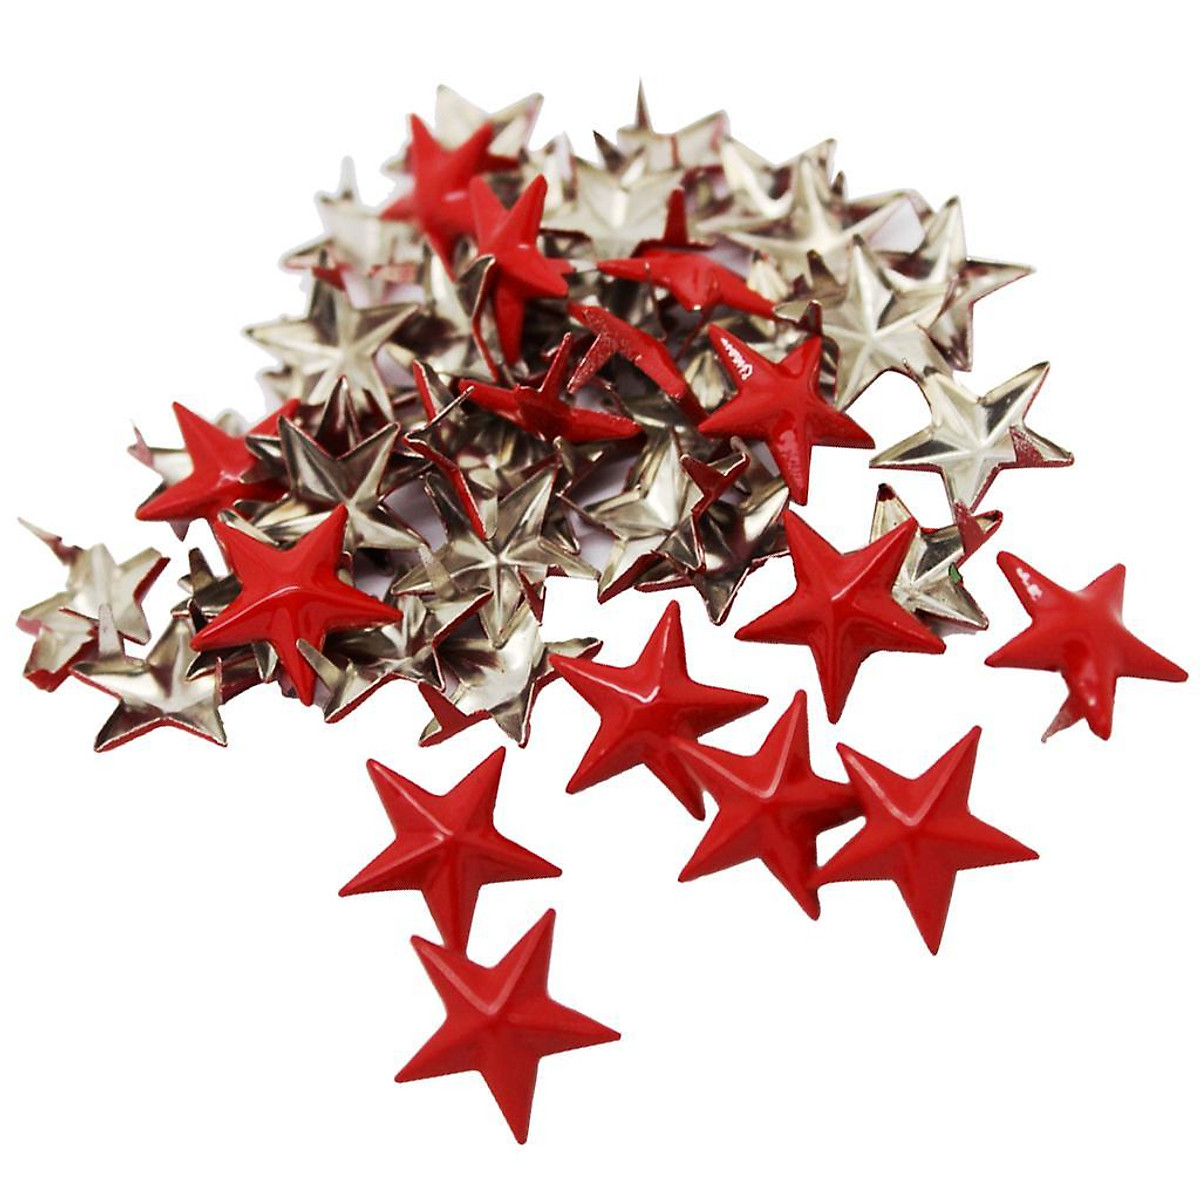 Mua Pack of 50 Big Red Star Studs Hand Press Rivets for Bracelets Shoes  Clothes Crafts tại Magideal